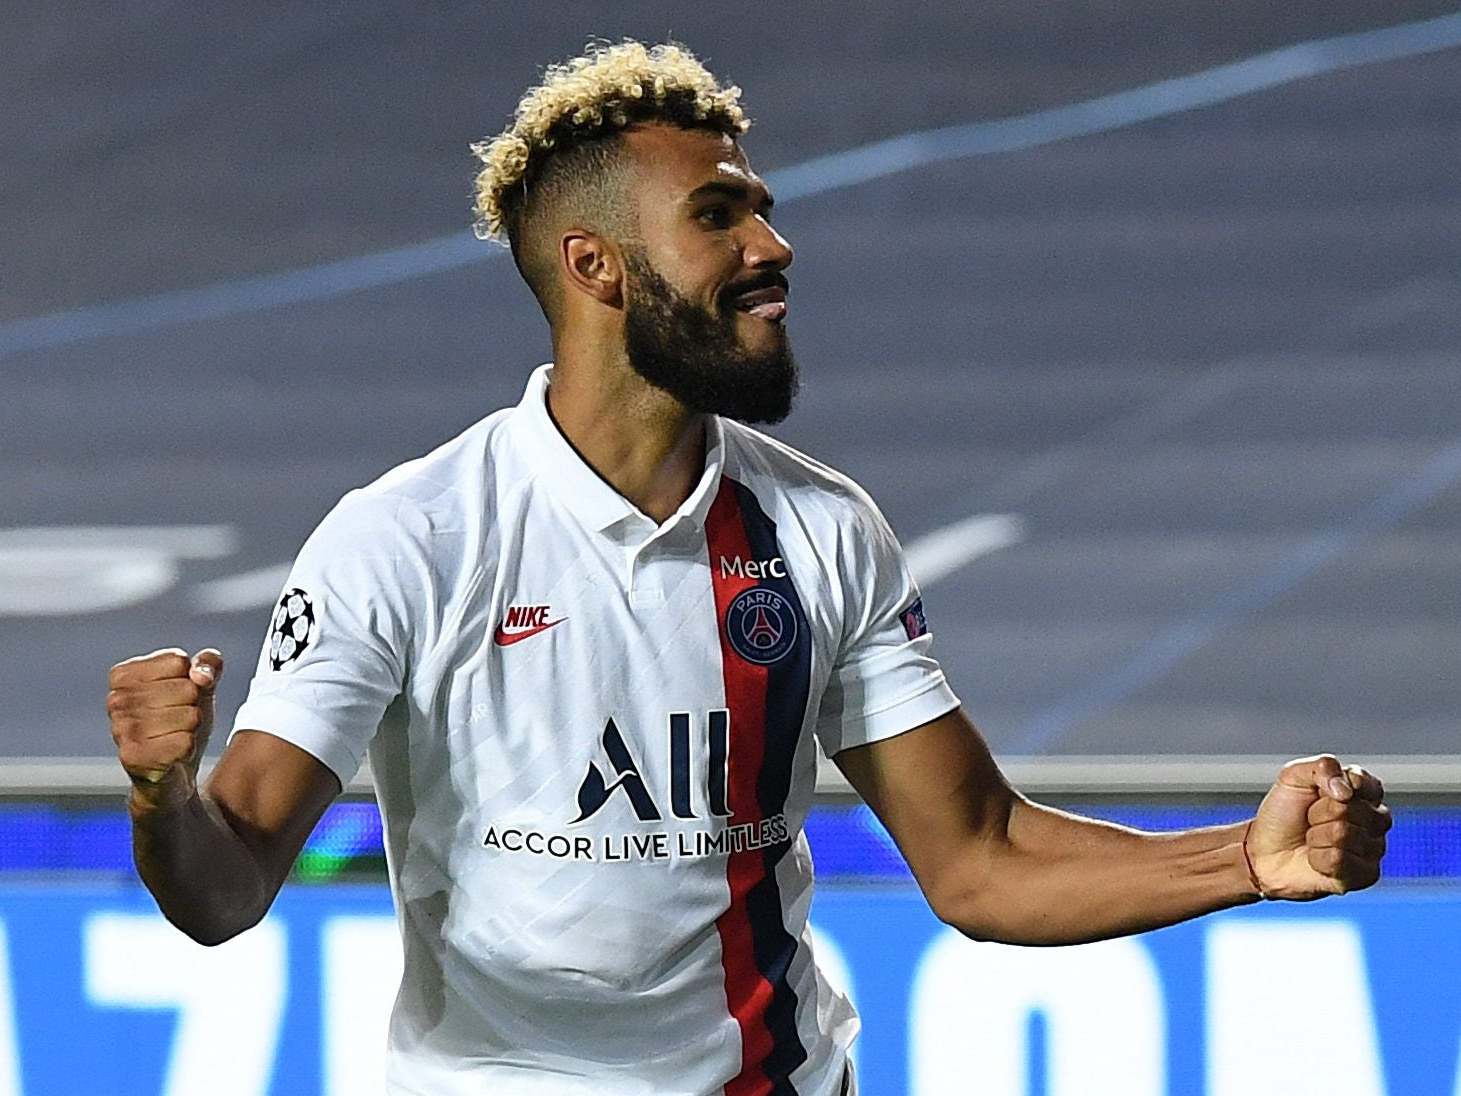 Atalanta vs PSG LIVE: Result and reaction from Champions League fixture tonight